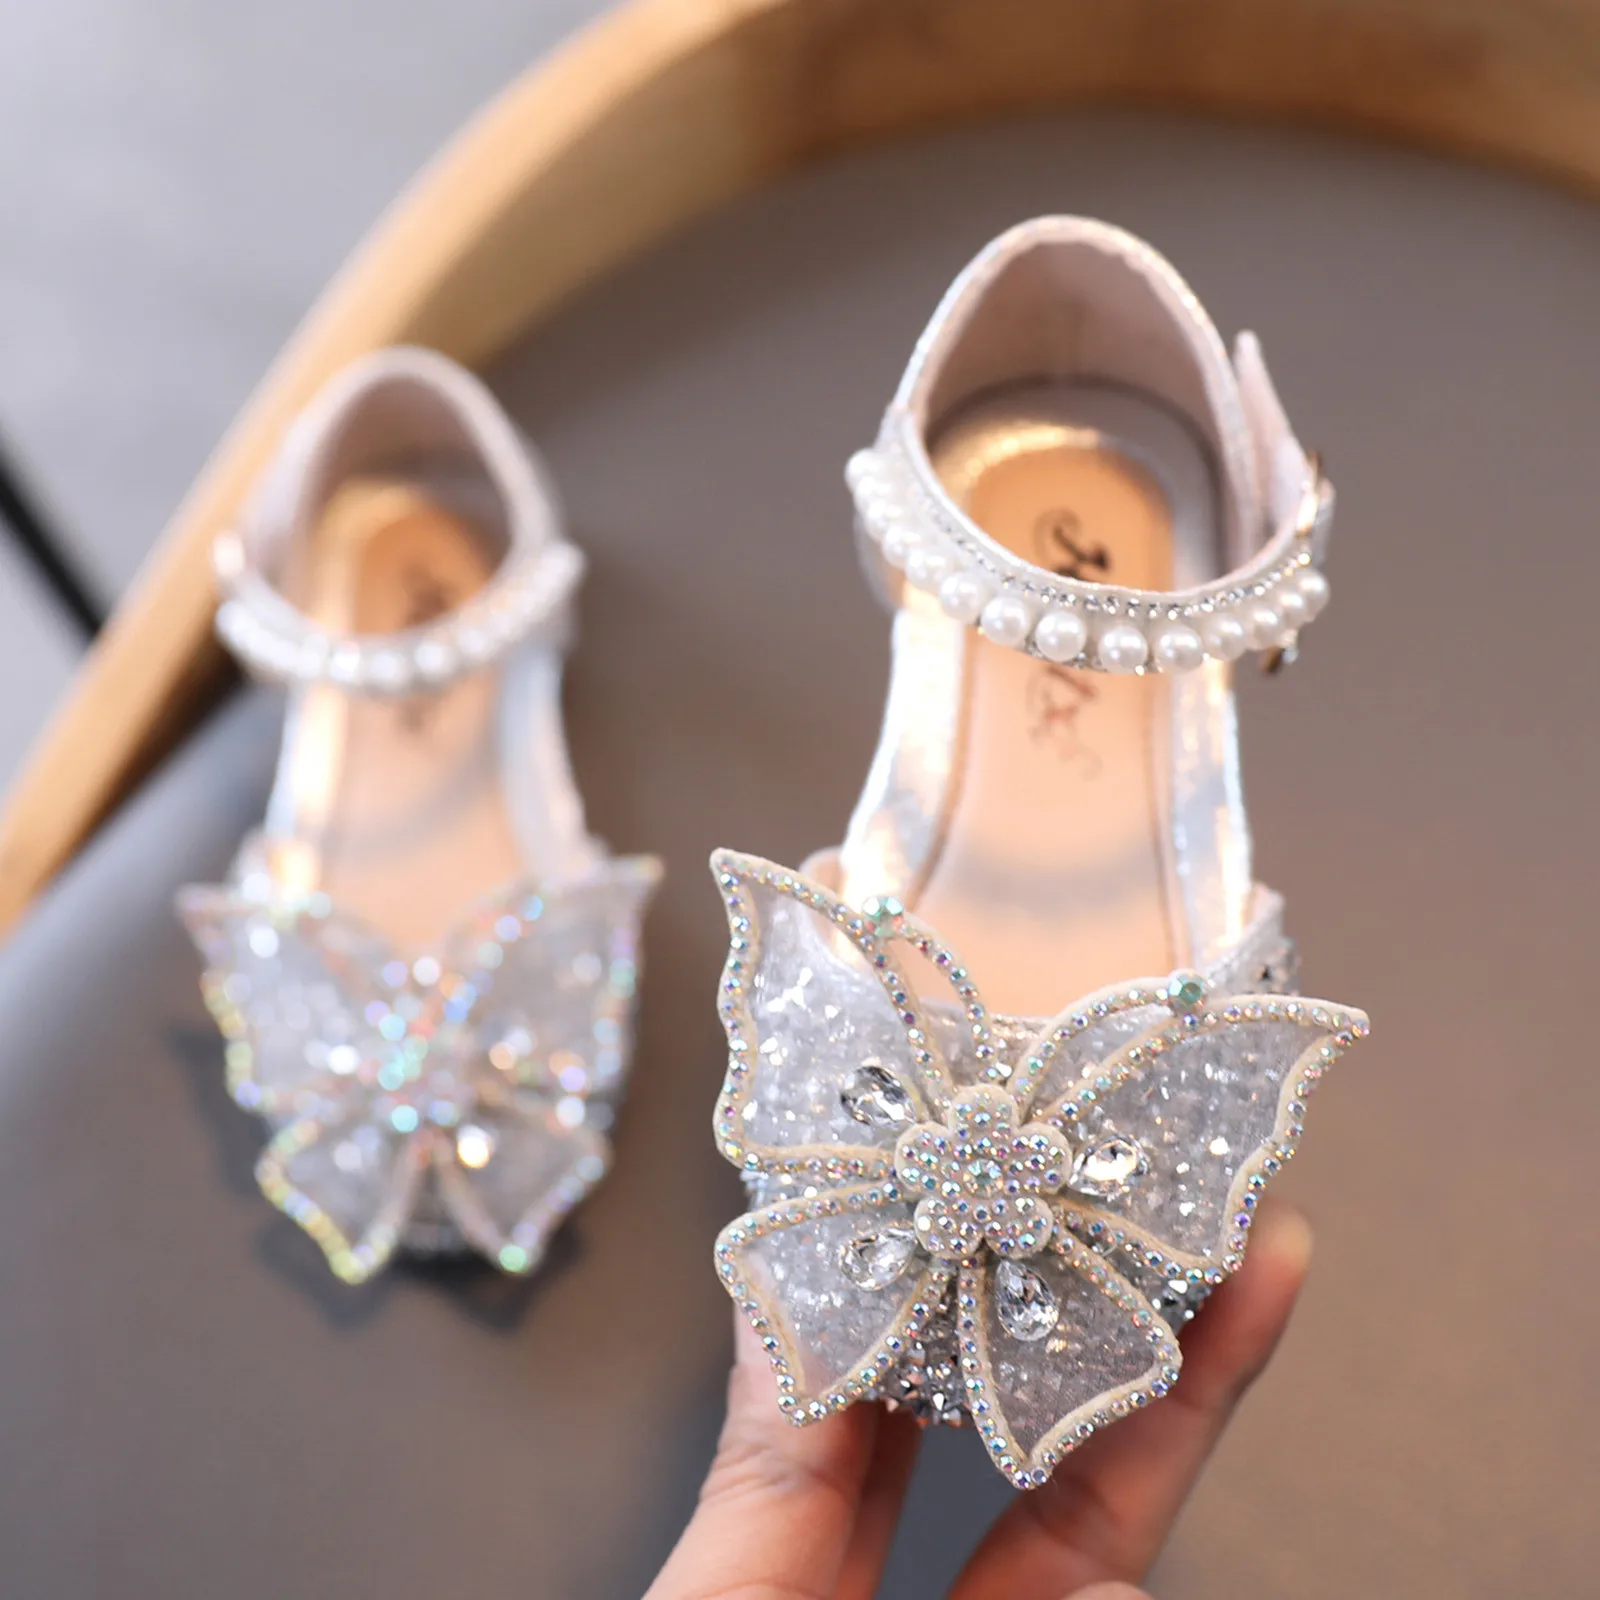 child shoes girl 1-11 Years Teen Girls Sequin Shoes Lace Bow Kids Girls Cute Pearl Princess Dance Single Casual Shoe Children Party Wedding Shoes girls shoes